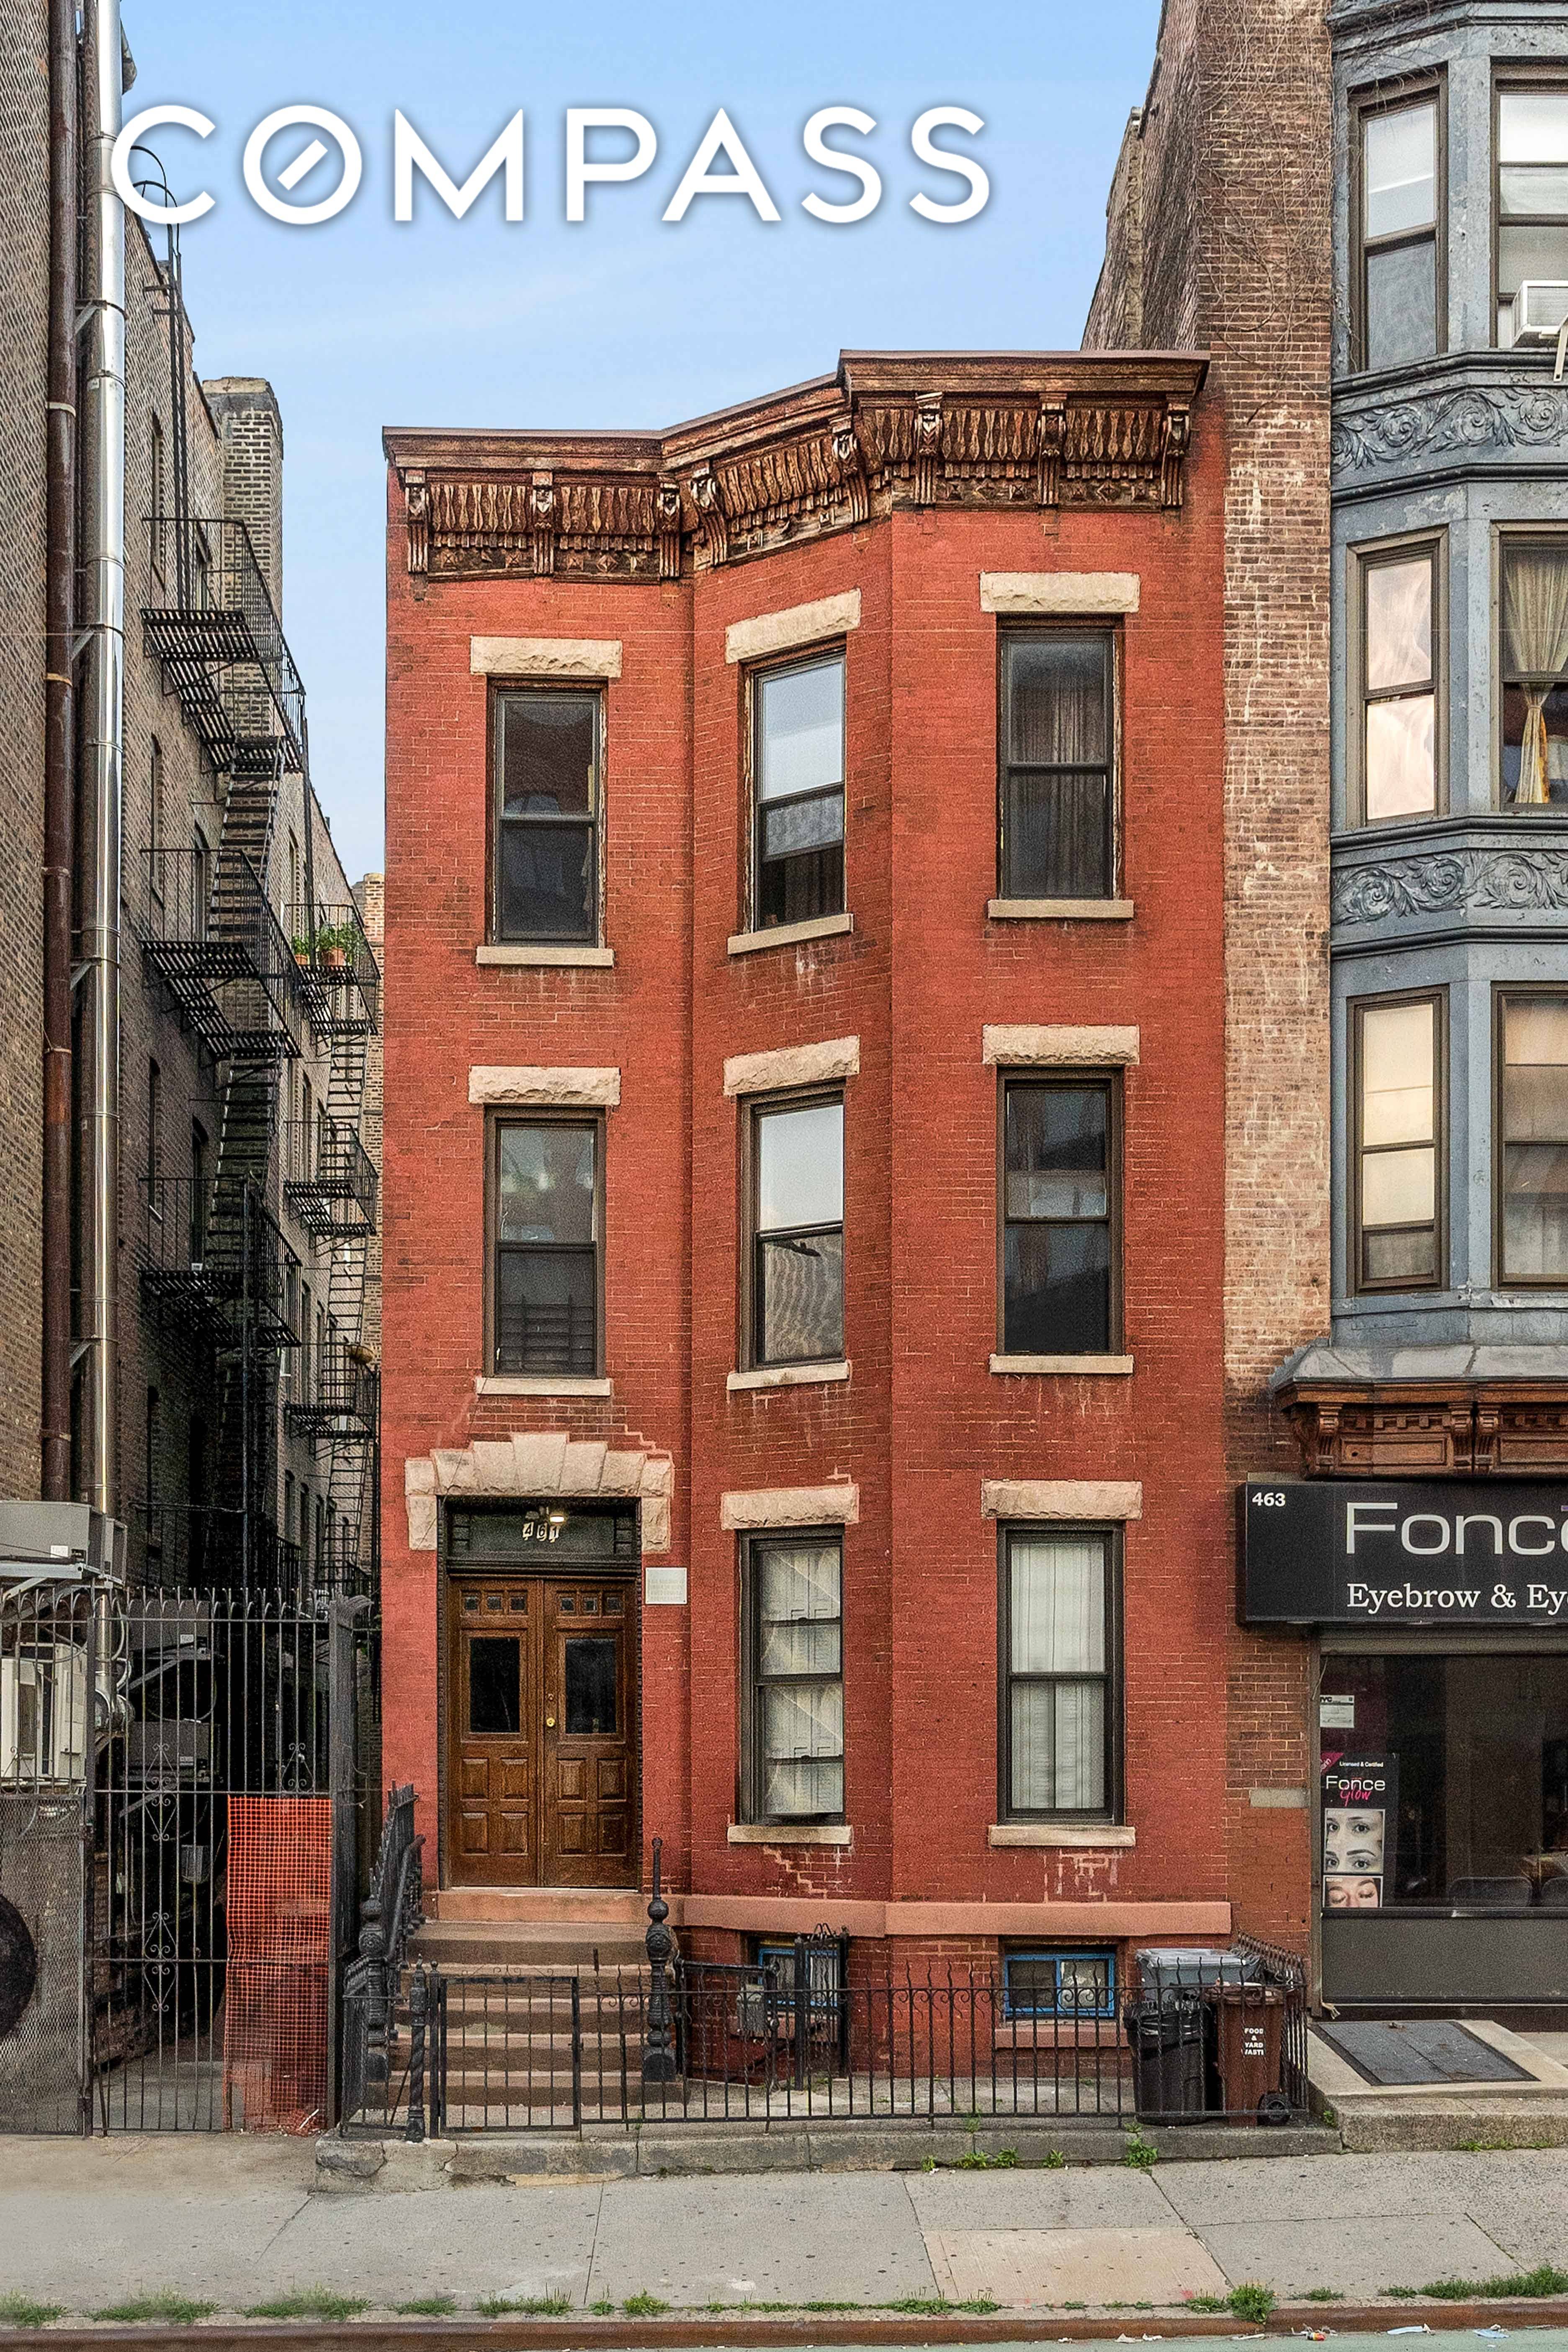 Built in the late 19th century, 461 4th Avenue is handsome 3 family brick mixed use building at the crossroads of Park Slope and Gowanus.